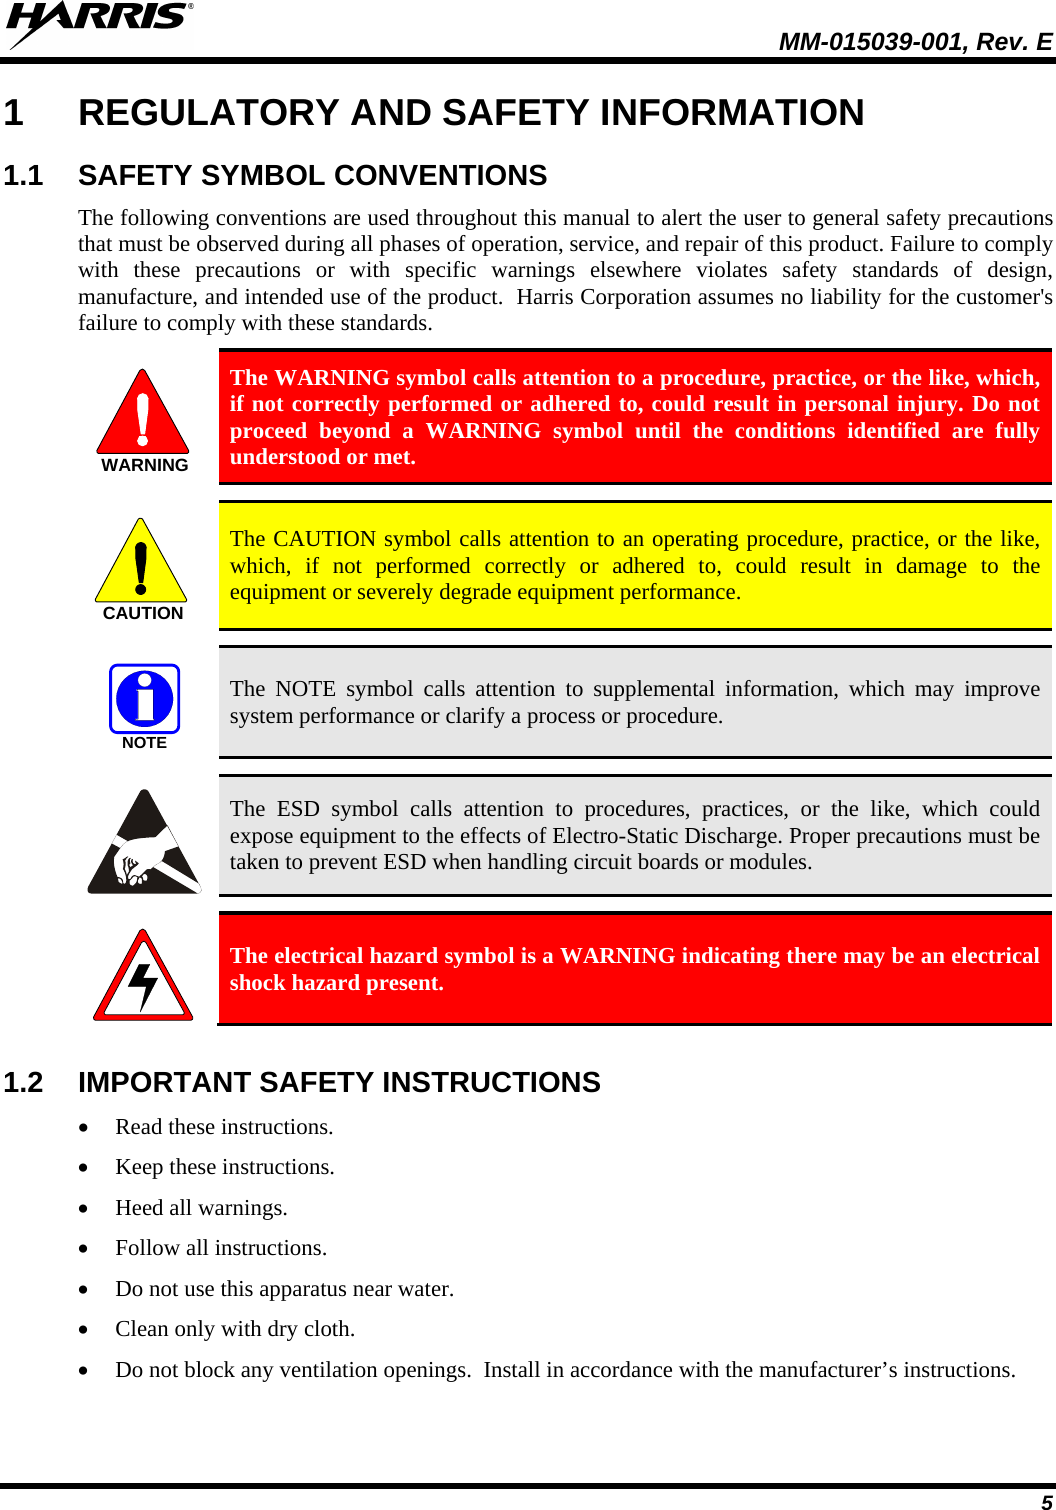   MM-015039-001, Rev. E 5 1  REGULATORY AND SAFETY INFORMATION 1.1 SAFETY SYMBOL CONVENTIONS The following conventions are used throughout this manual to alert the user to general safety precautions that must be observed during all phases of operation, service, and repair of this product. Failure to comply with these precautions or with specific warnings elsewhere violates safety standards of design, manufacture, and intended use of the product.  Harris Corporation assumes no liability for the customer&apos;s failure to comply with these standards.  The WARNING symbol calls attention to a procedure, practice, or the like, which, if not correctly performed or adhered to, could result in personal injury. Do not proceed beyond a WARNING symbol until the conditions identified are fully understood or met.     The CAUTION symbol calls attention to an operating procedure, practice, or the like, which, if not performed correctly or adhered to, could result in damage to the equipment or severely degrade equipment performance.    The NOTE symbol calls attention to supplemental information, which may improve system performance or clarify a process or procedure.    The ESD symbol calls attention to procedures, practices, or the like, which could expose equipment to the effects of Electro-Static Discharge. Proper precautions must be taken to prevent ESD when handling circuit boards or modules.    The electrical hazard symbol is a WARNING indicating there may be an electrical shock hazard present.  1.2 IMPORTANT SAFETY INSTRUCTIONS • Read these instructions. • Keep these instructions. • Heed all warnings. • Follow all instructions. • Do not use this apparatus near water. • Clean only with dry cloth. • Do not block any ventilation openings.  Install in accordance with the manufacturer’s instructions. WARNINGCAUTIONNOTE